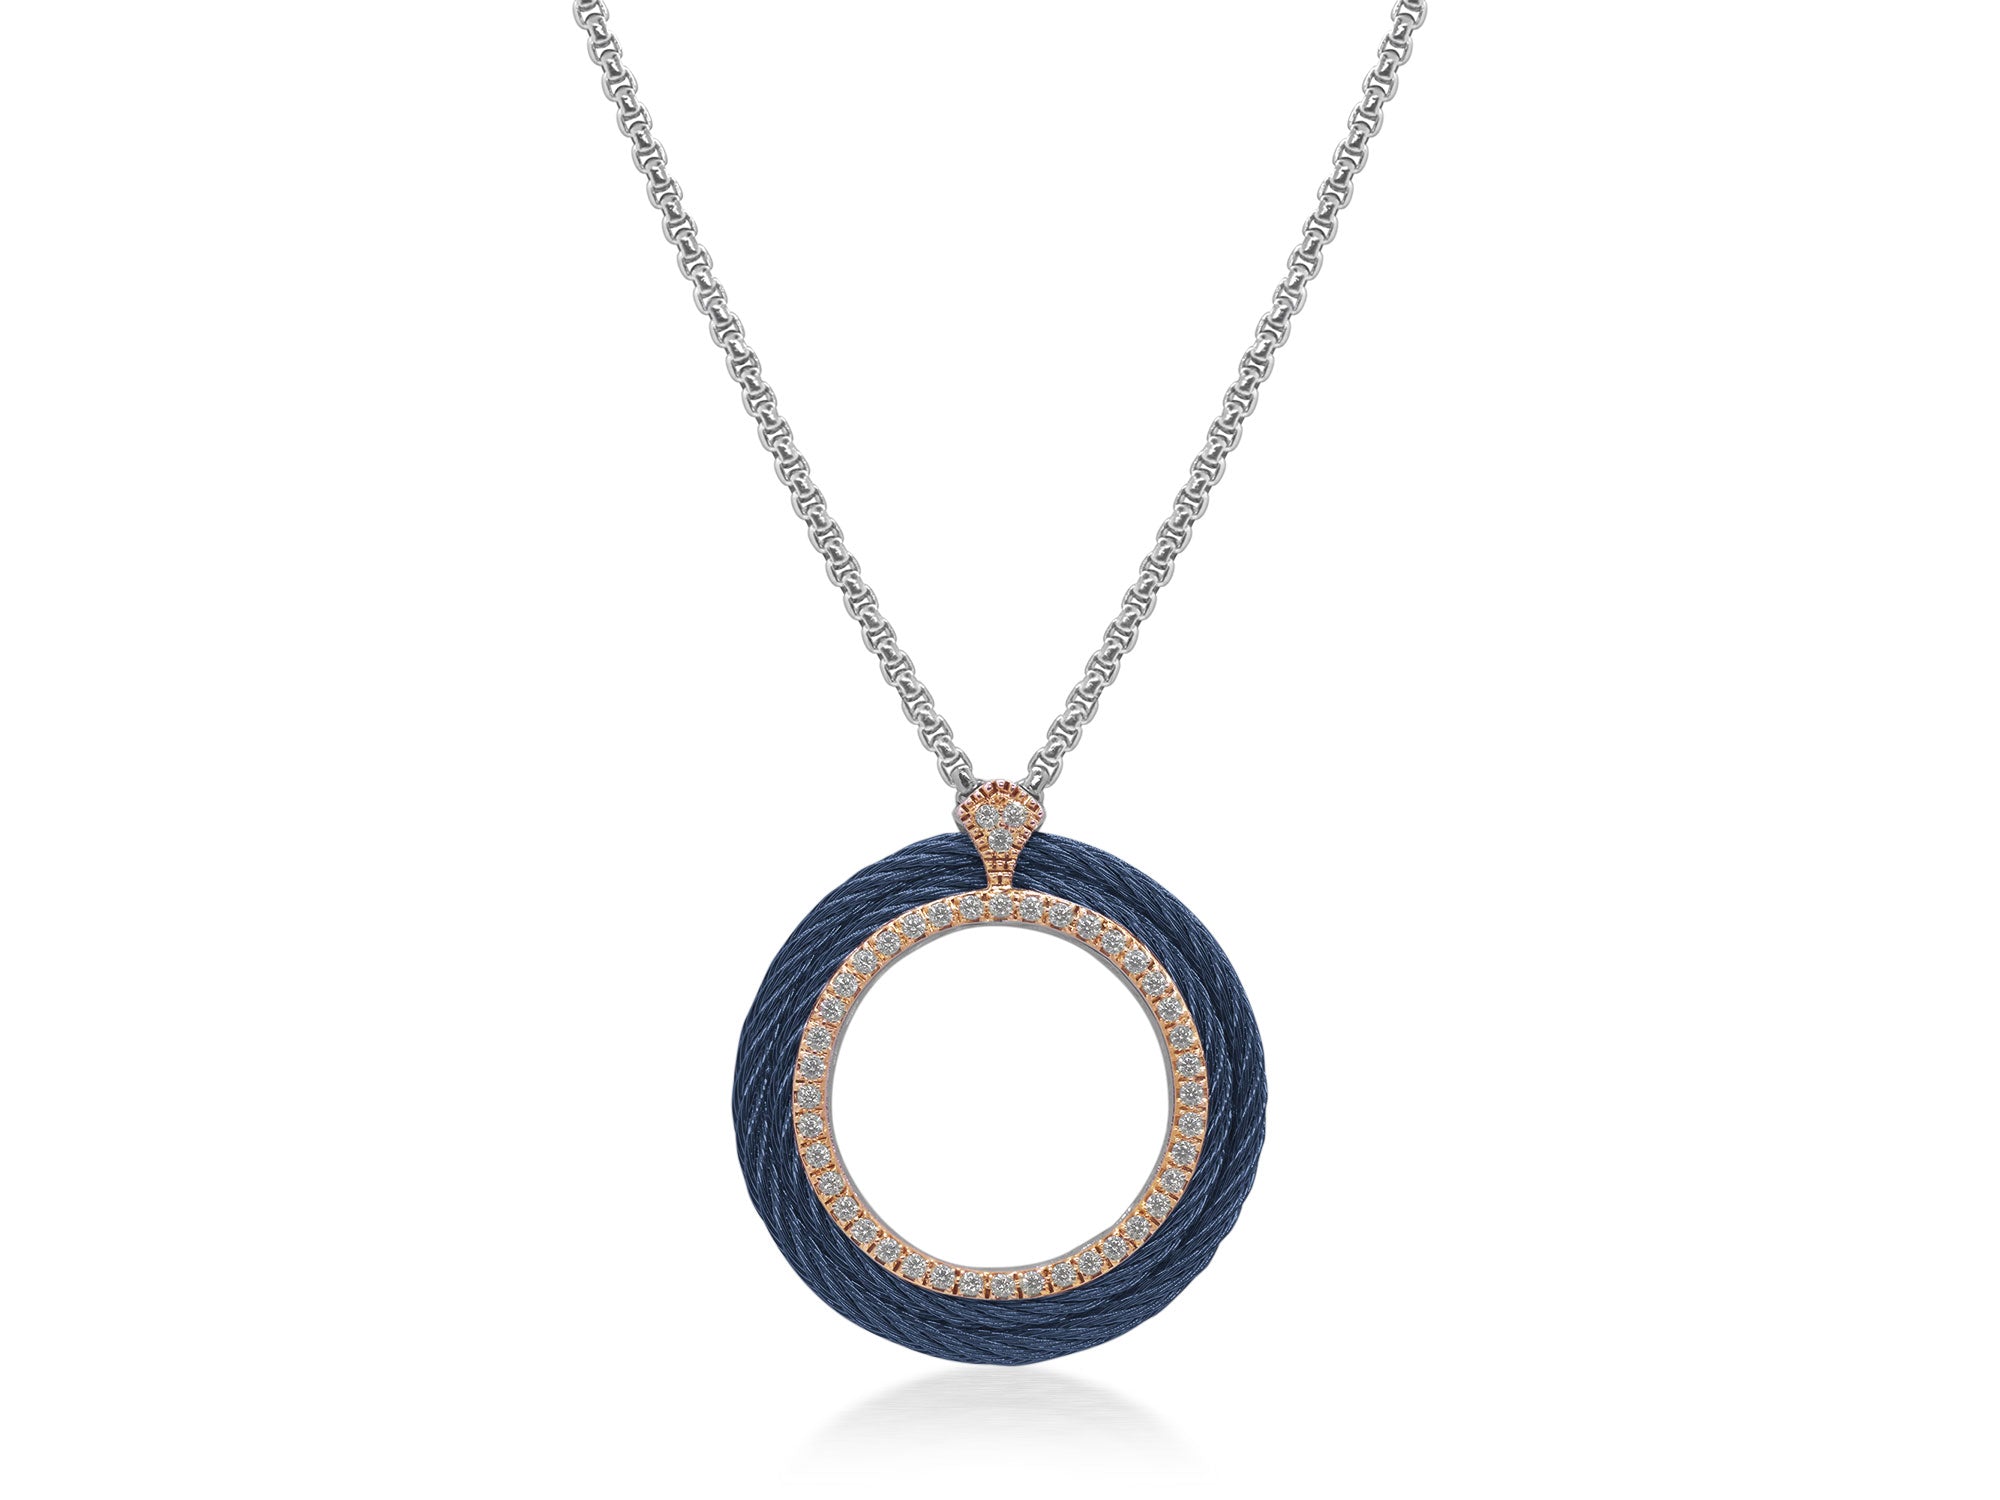 Grey Chain & Blueberry Cable Circle Pendant Necklace with 18kt Rose Gold & Diamonds